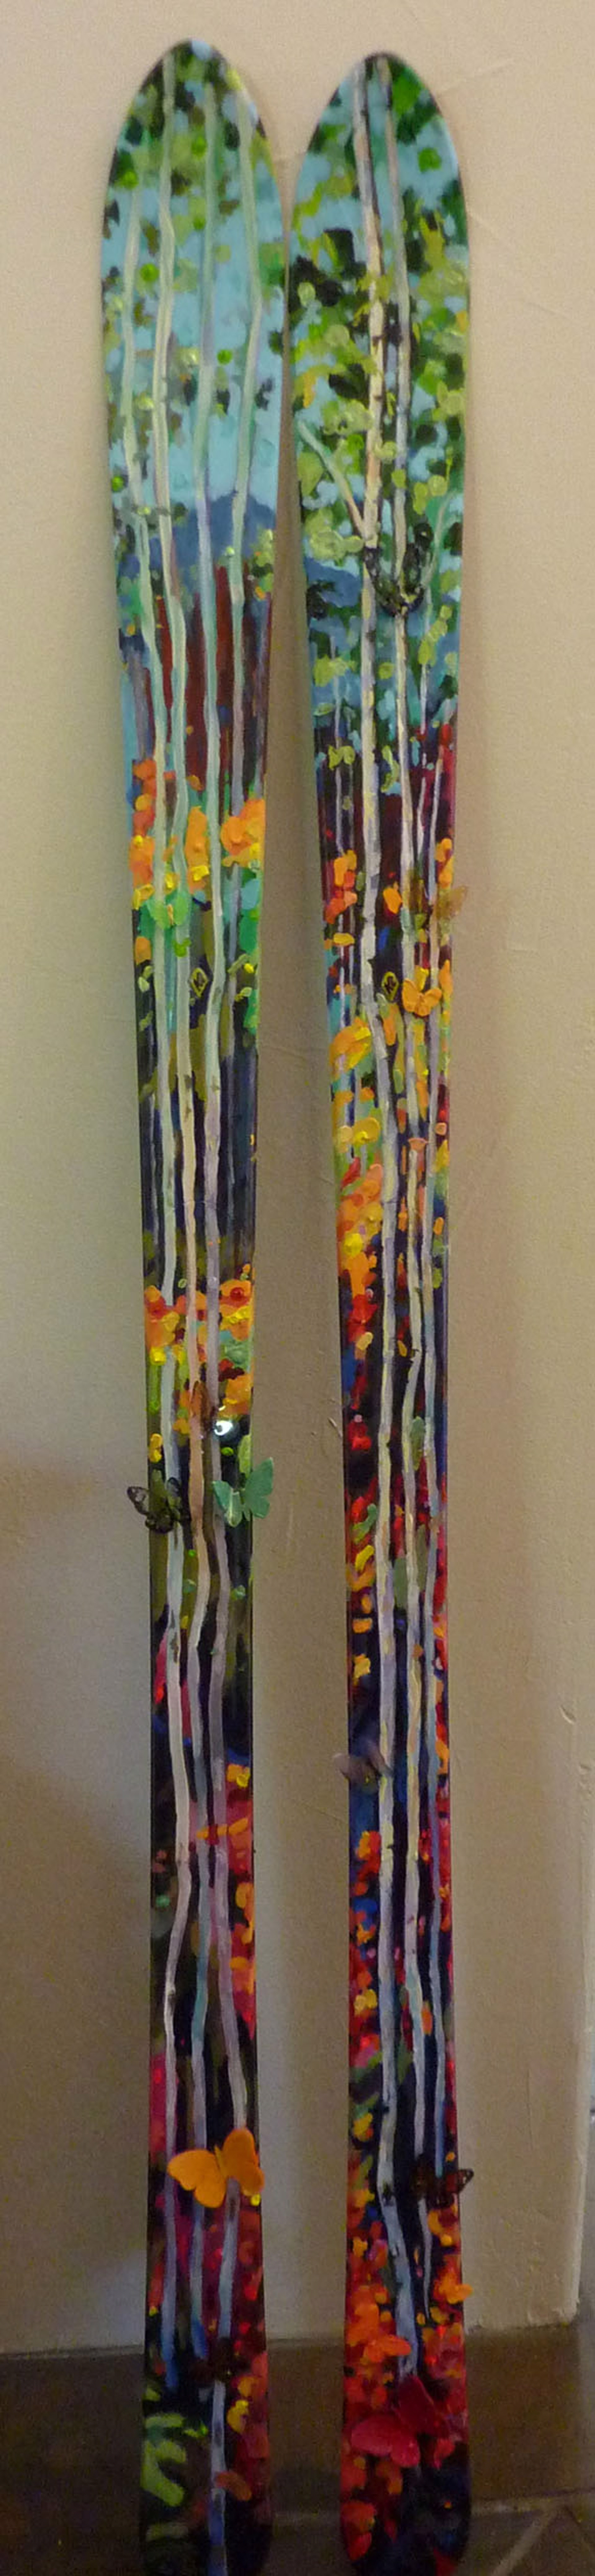 Skis with Abstract Aspens and 3D Butterflies by Cindi Underwood